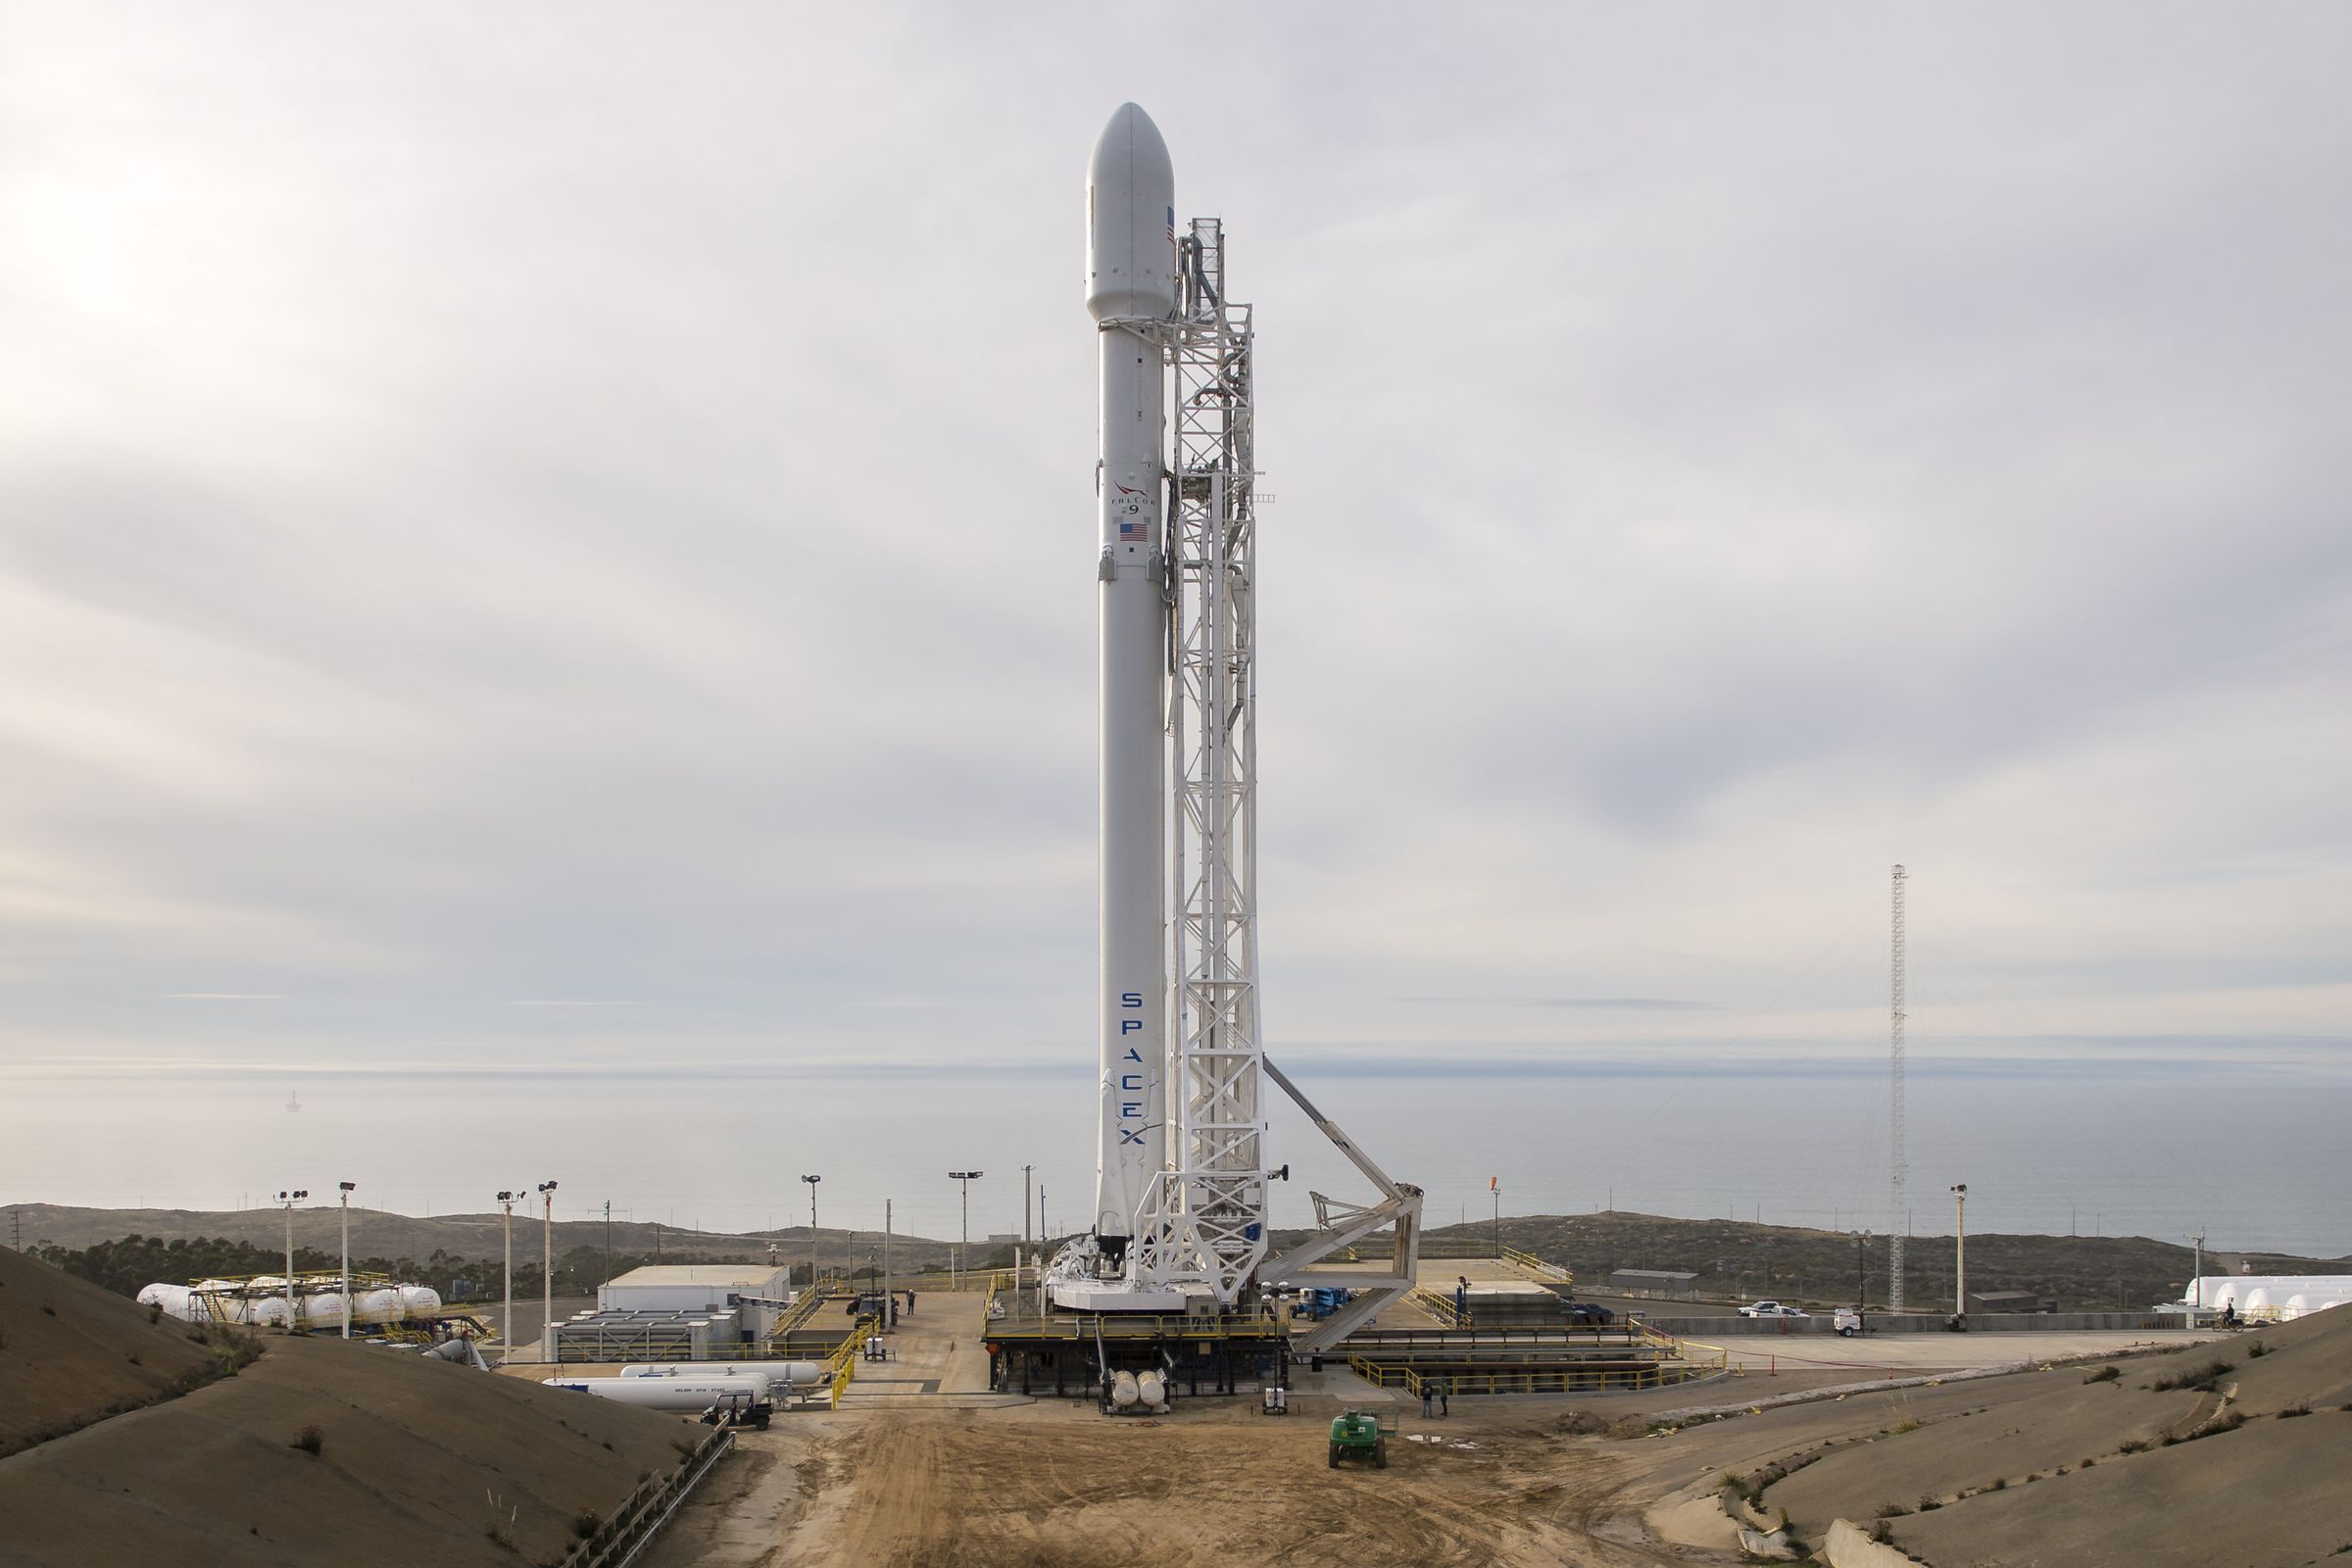 SpaceX’s Falcon 9 at Vandenberg Air Force Base